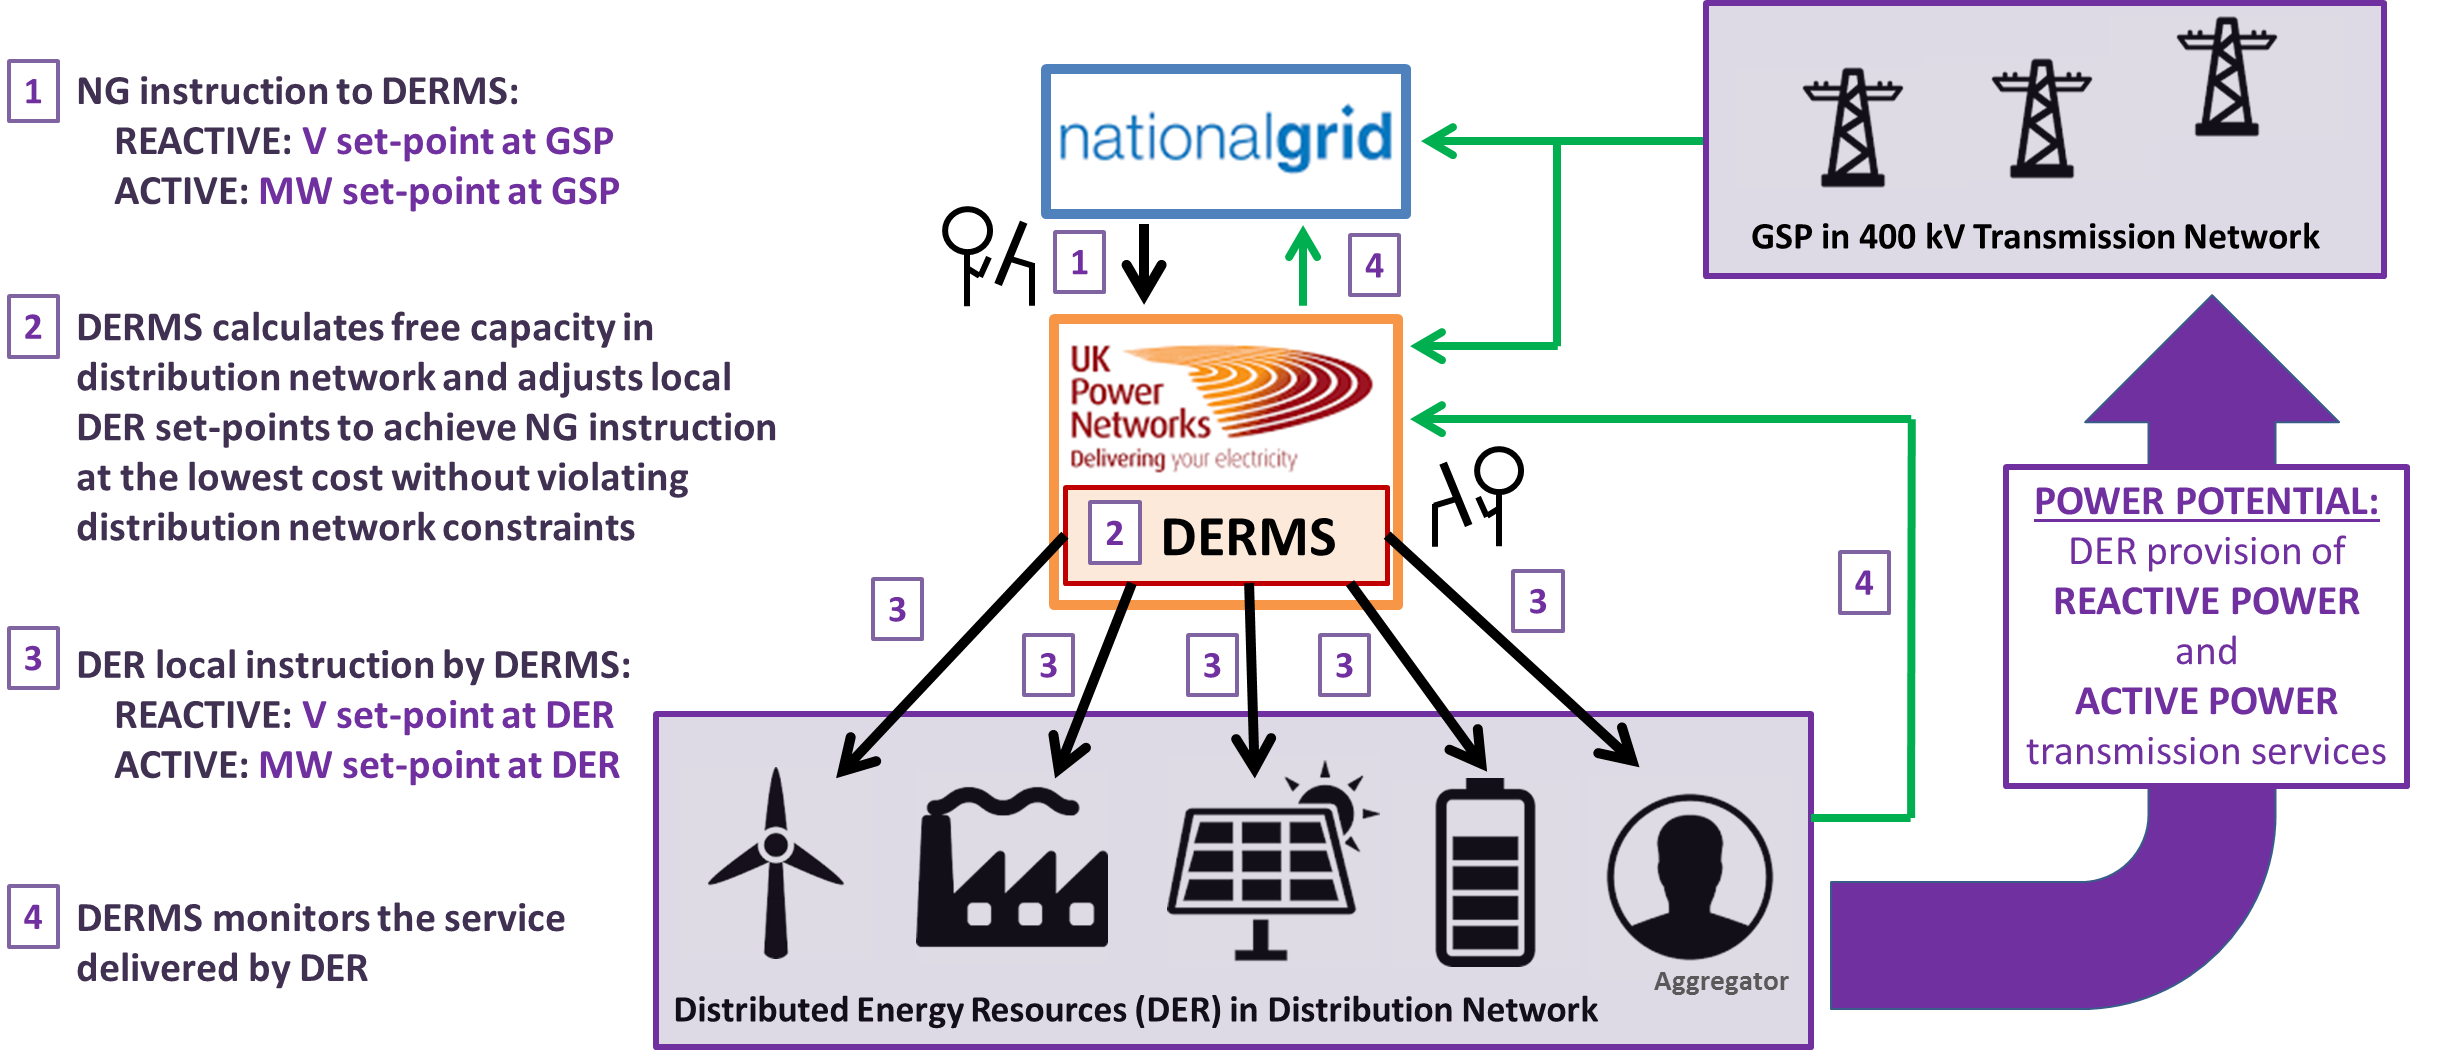 A purple illustration outlining how DERMS work in a National Grid context 